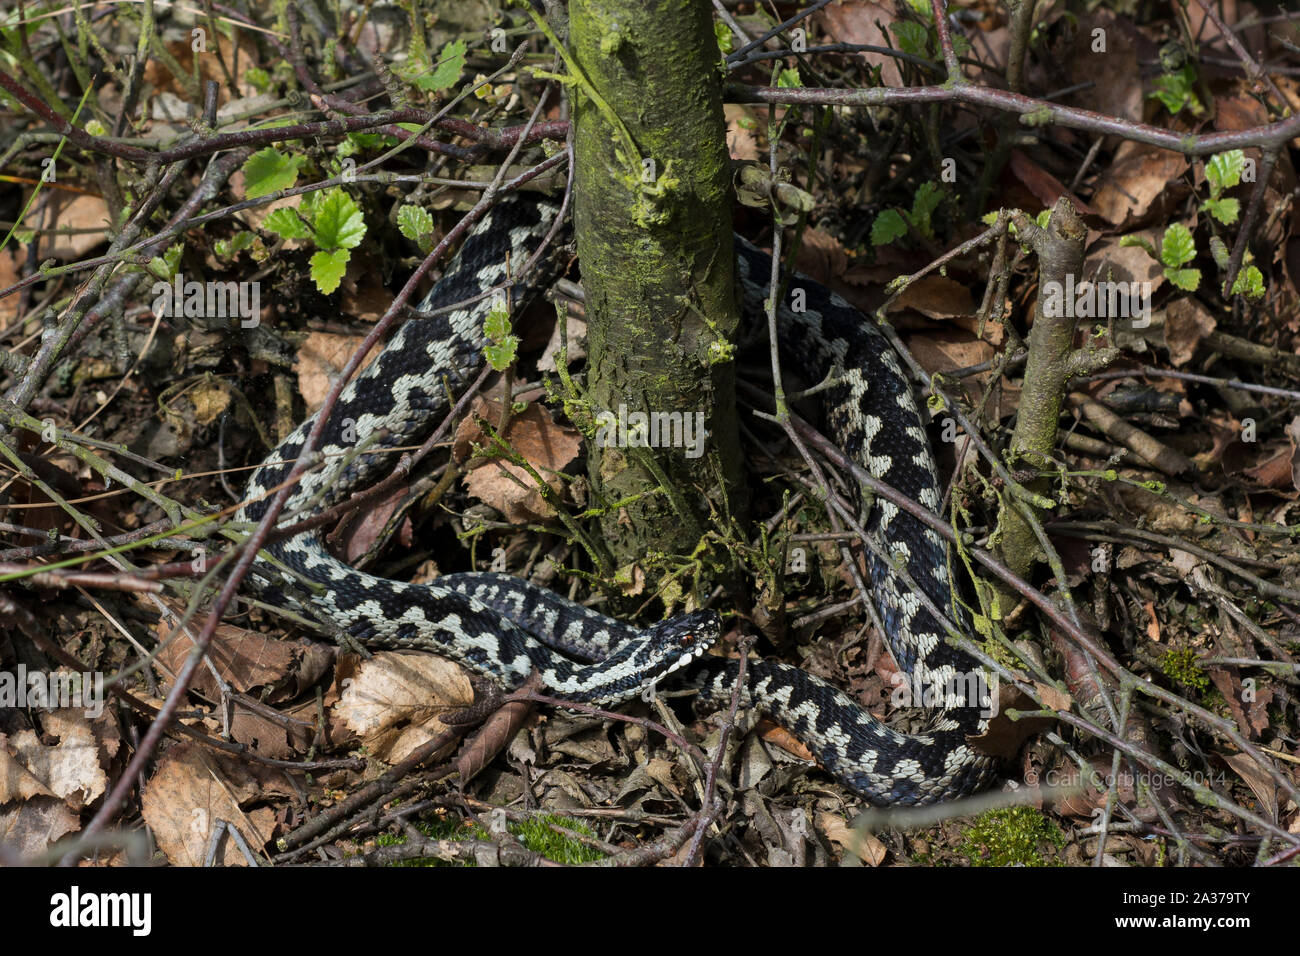 Male Adder (Vipera berus) curled up basking in heather and wrapped around a silver birch tree, on the Northern Pennines. Stock Photo